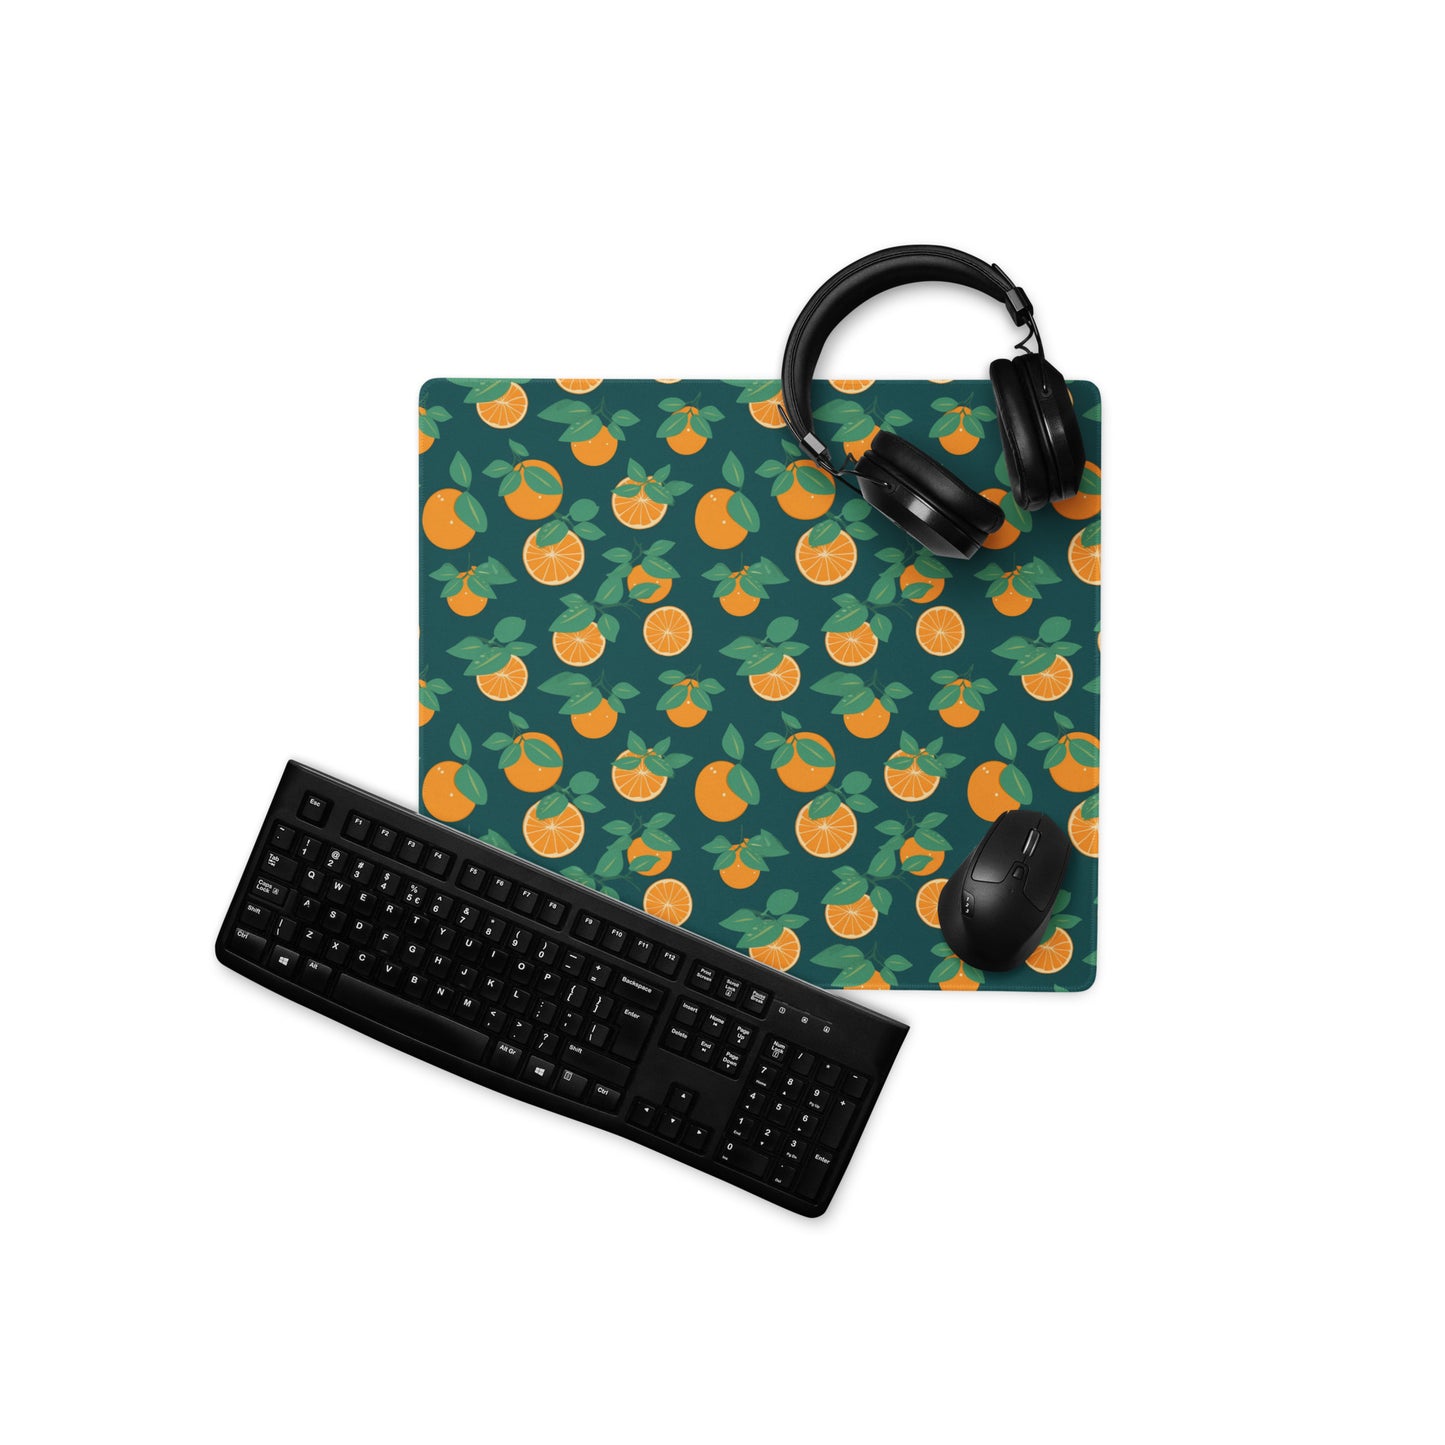 A 18" x 16" desk pad with oranges all over it displayed with a keyboard, headphones and a mouse. Orange and Blue in color.